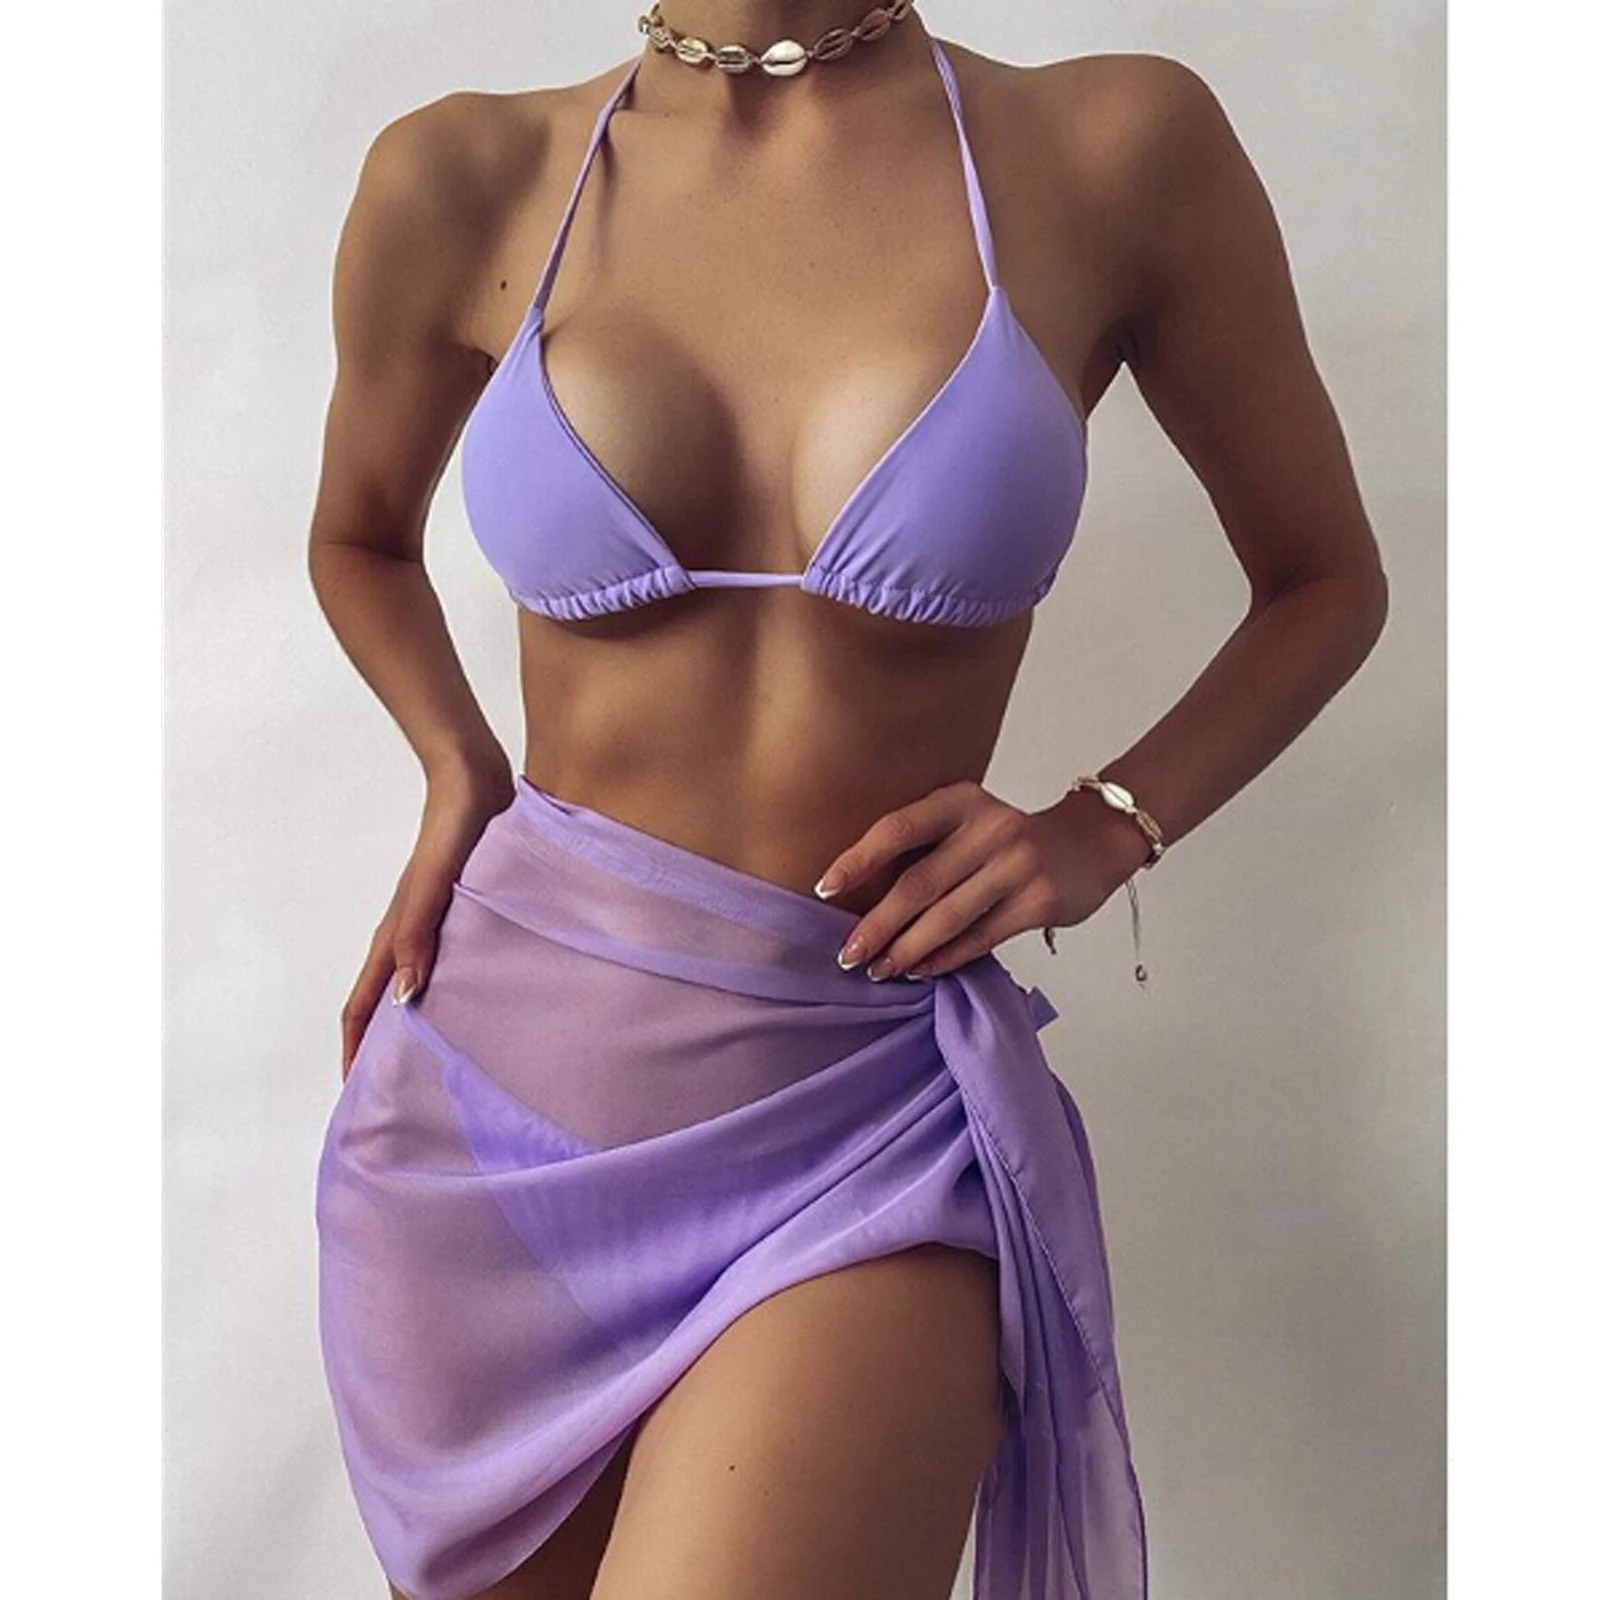 summer beach maxi dresses Mesh Sheer Bikini Cover Skirts For Women's 2021 Sexy Solid Gradient High Waist Wrap Skirt Beach Vacation Skirt Swimsuit sexy bathing suit cover ups